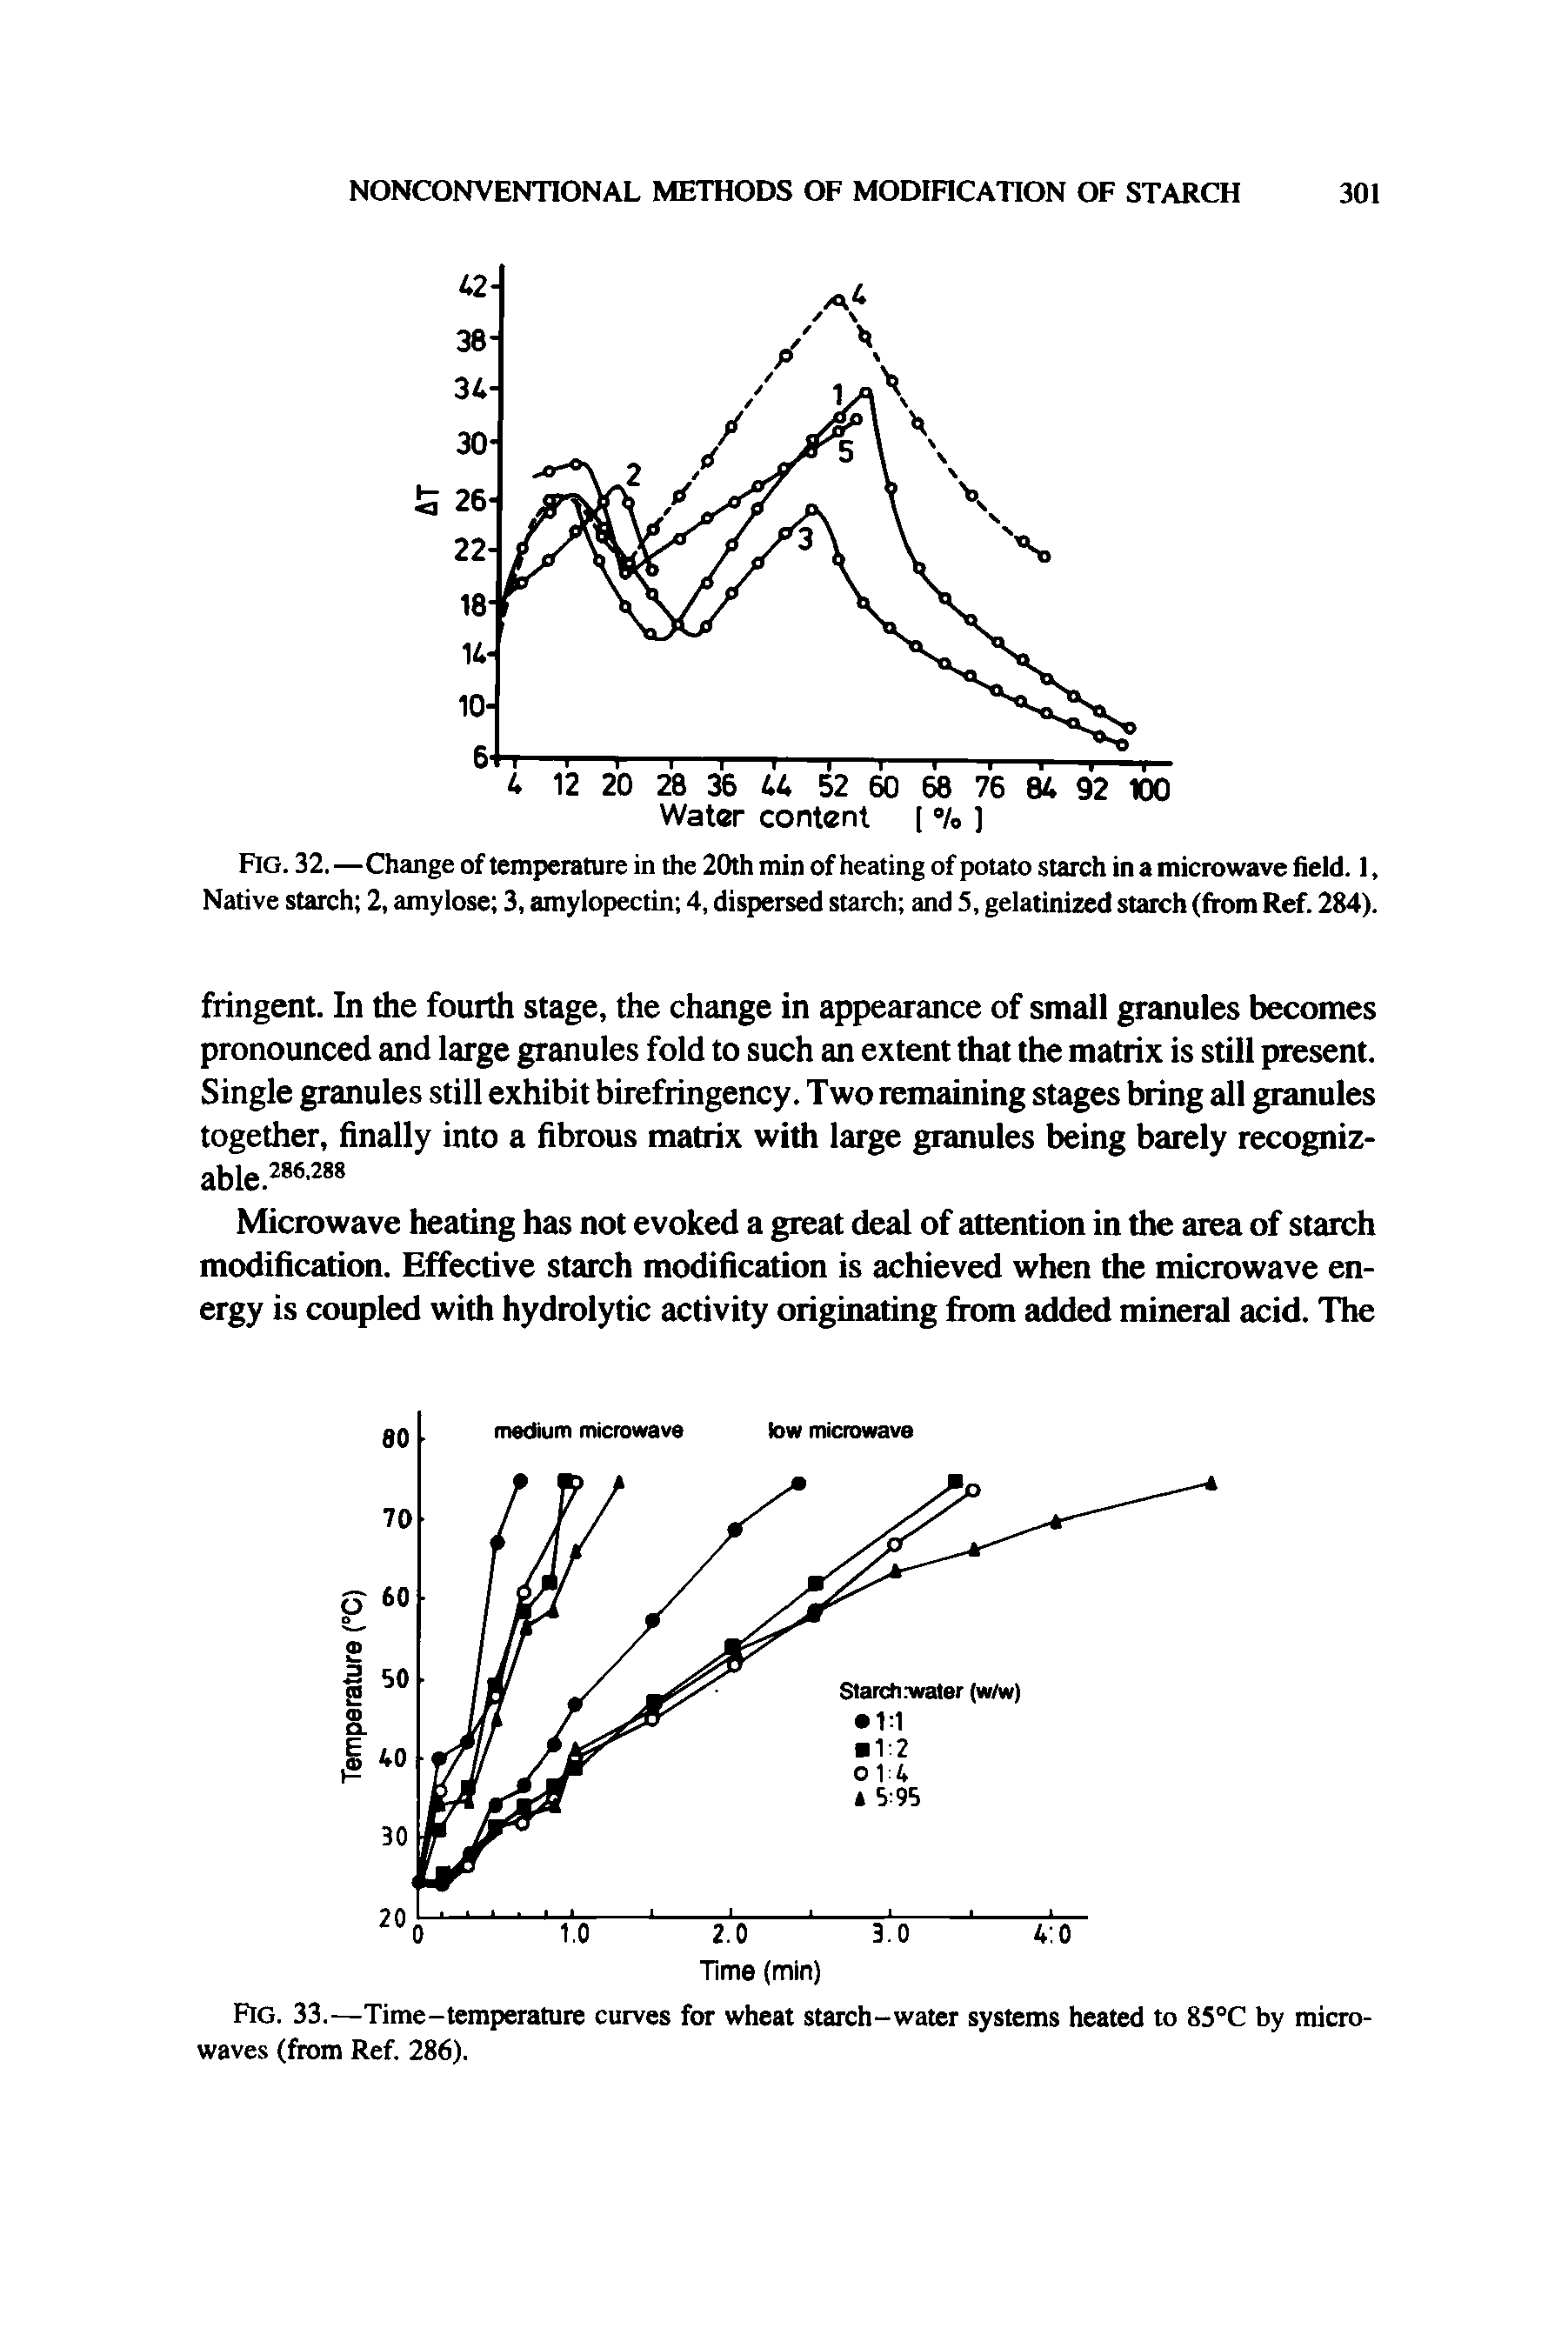 Fig. 32.—Change of temperature in the 20th min of heating of potato starch in a microwave field. 1, Native starch 2, amylose 3, amylopectin 4, dispersed starch and 5, gelatinized starch (from Ref. 284).